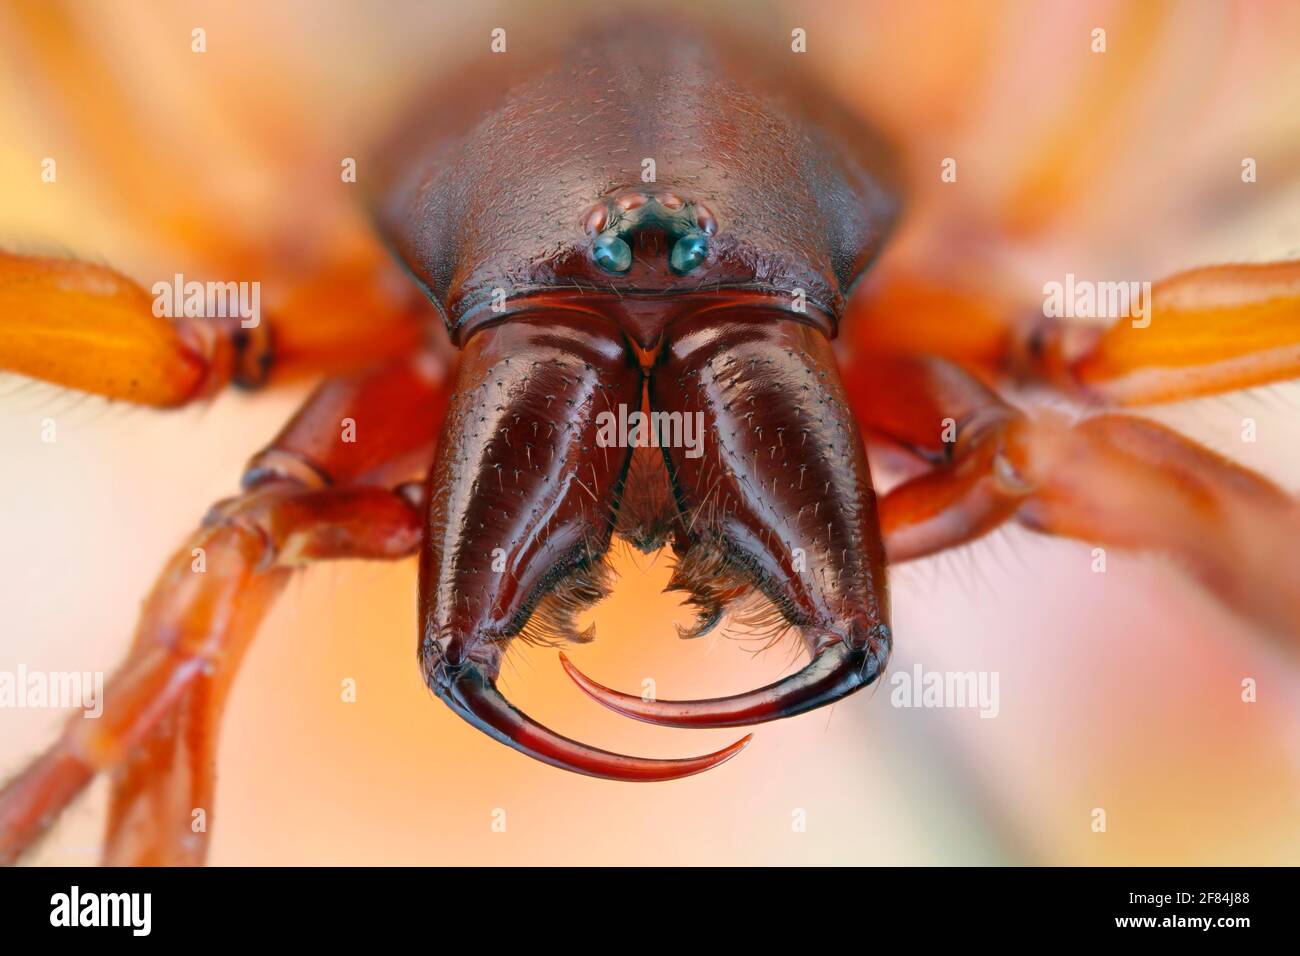 Frontal view of a spider (Dysdera crocata) with large jaw claws Stock Photo